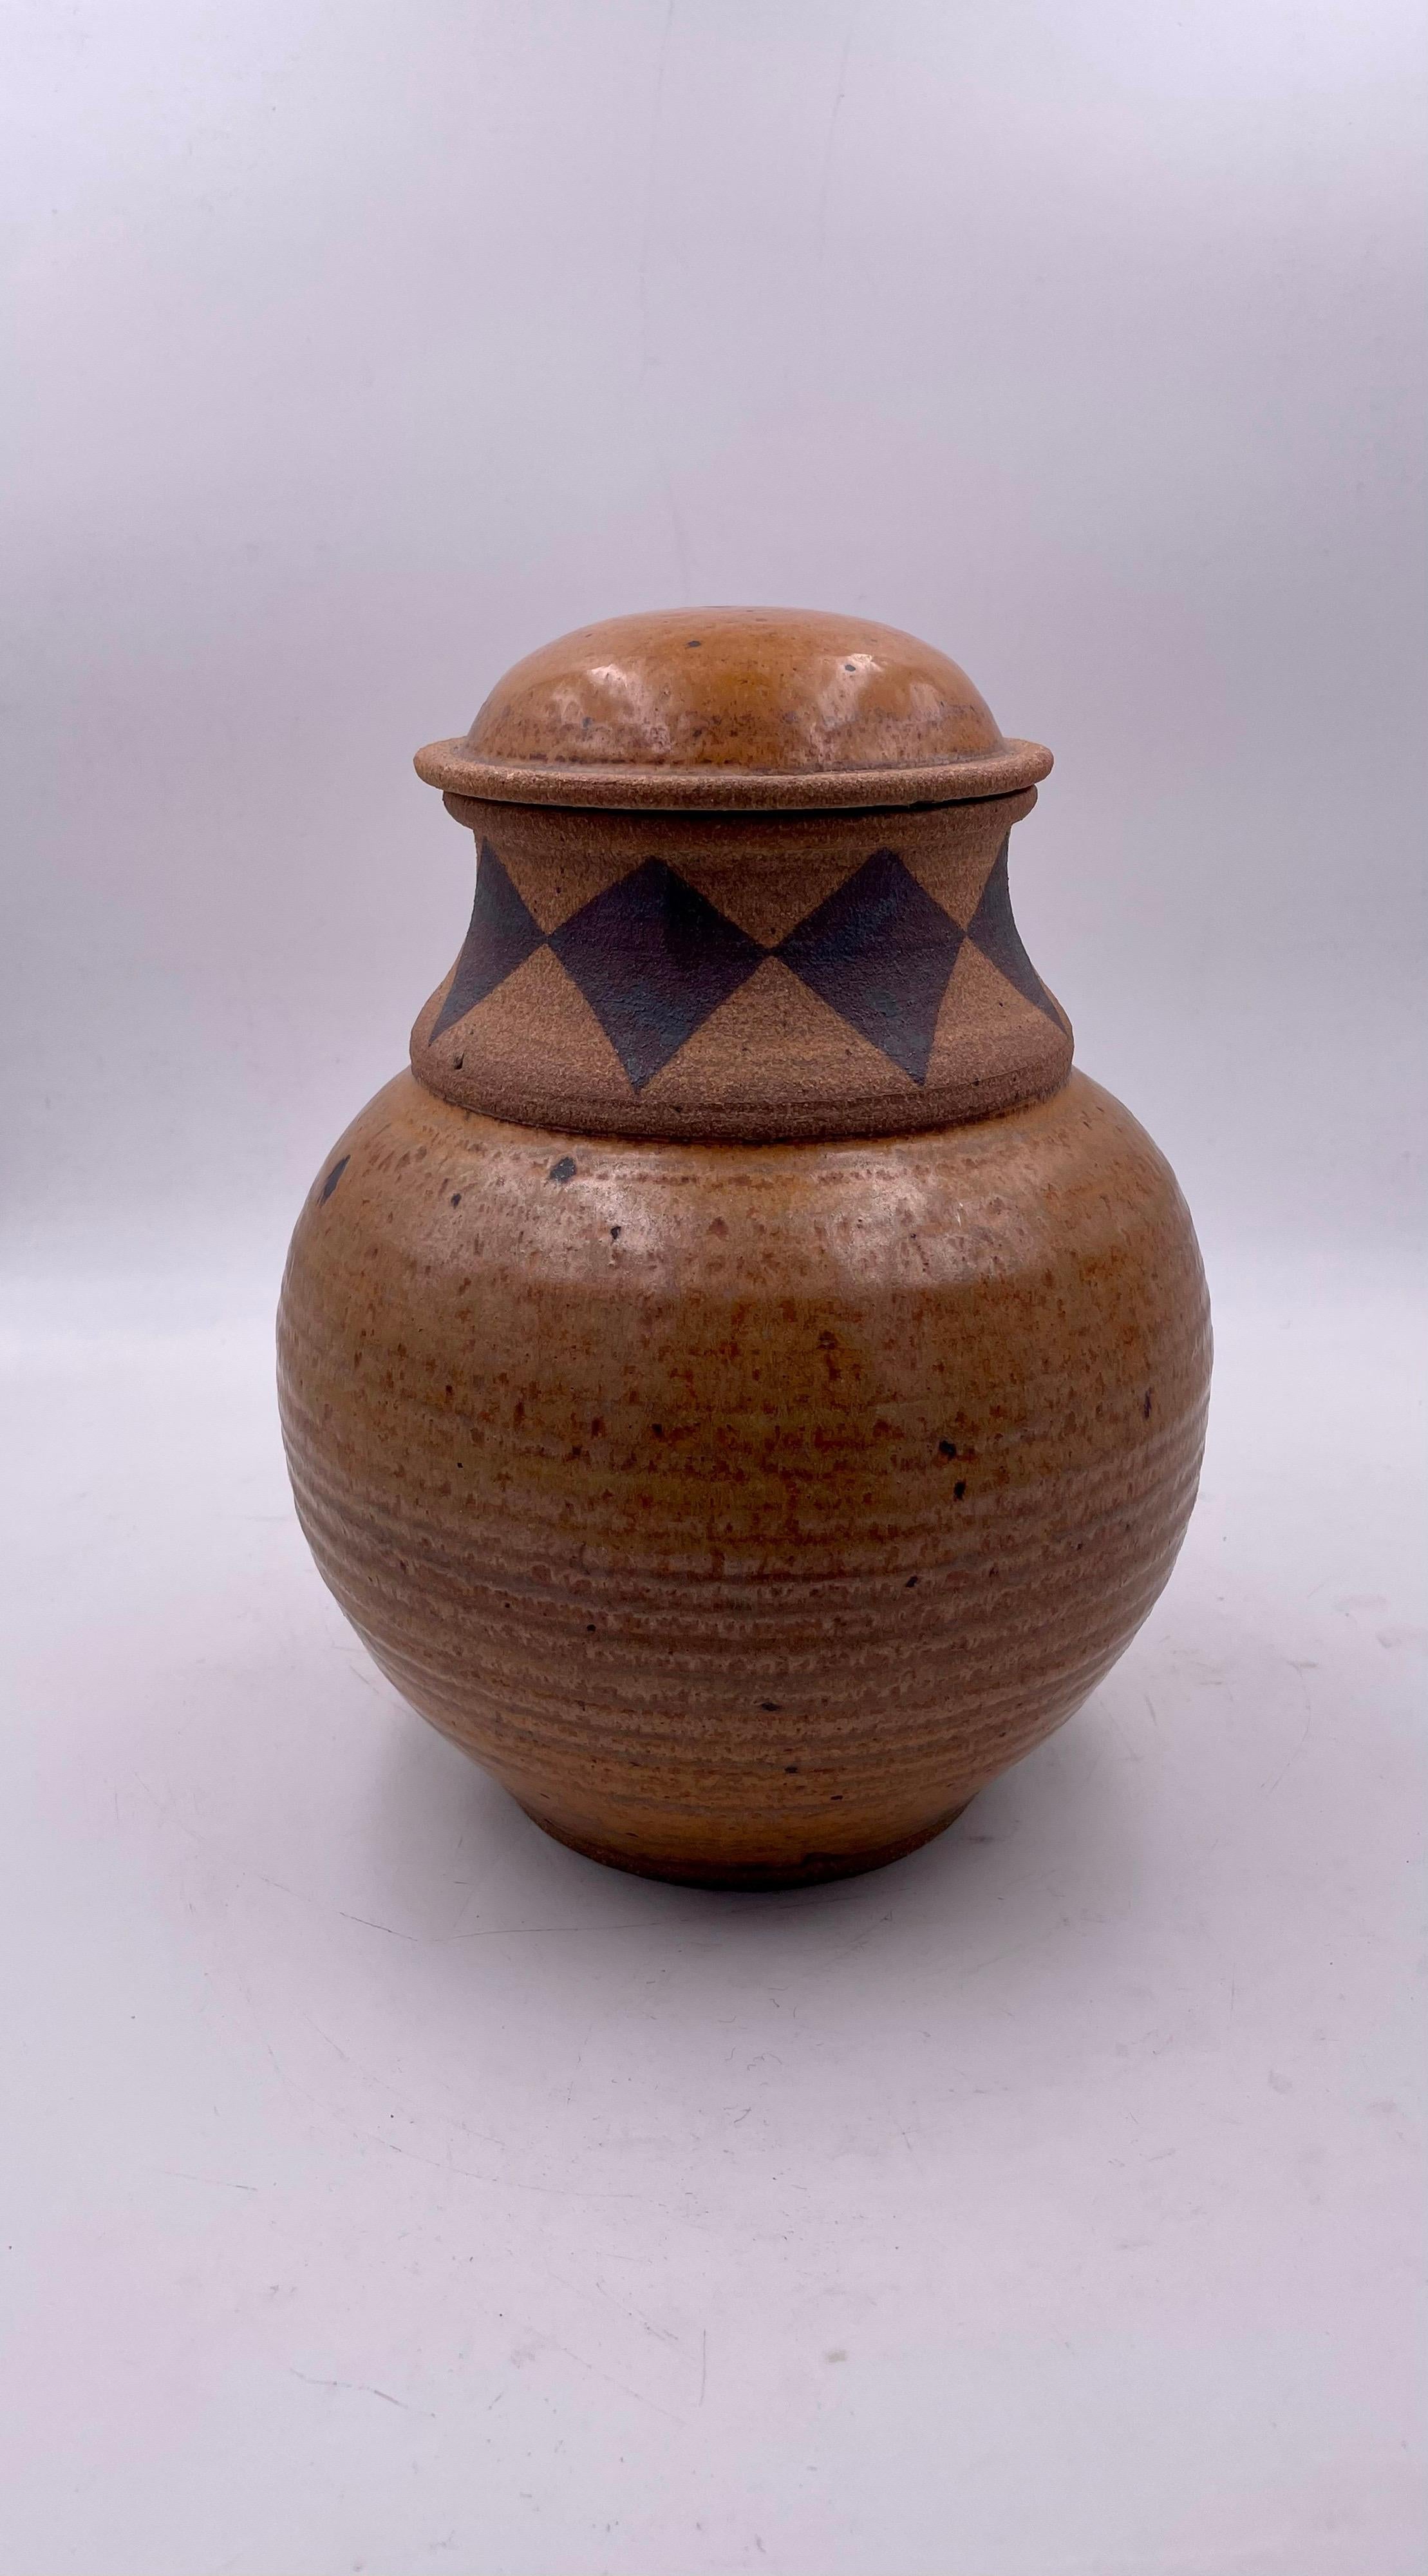 Beautiful hand-thrown ceramic jar with lid signed and dated by Joshua Mare I belive he is An Arizona artist, excellent condition no chips or cracks.